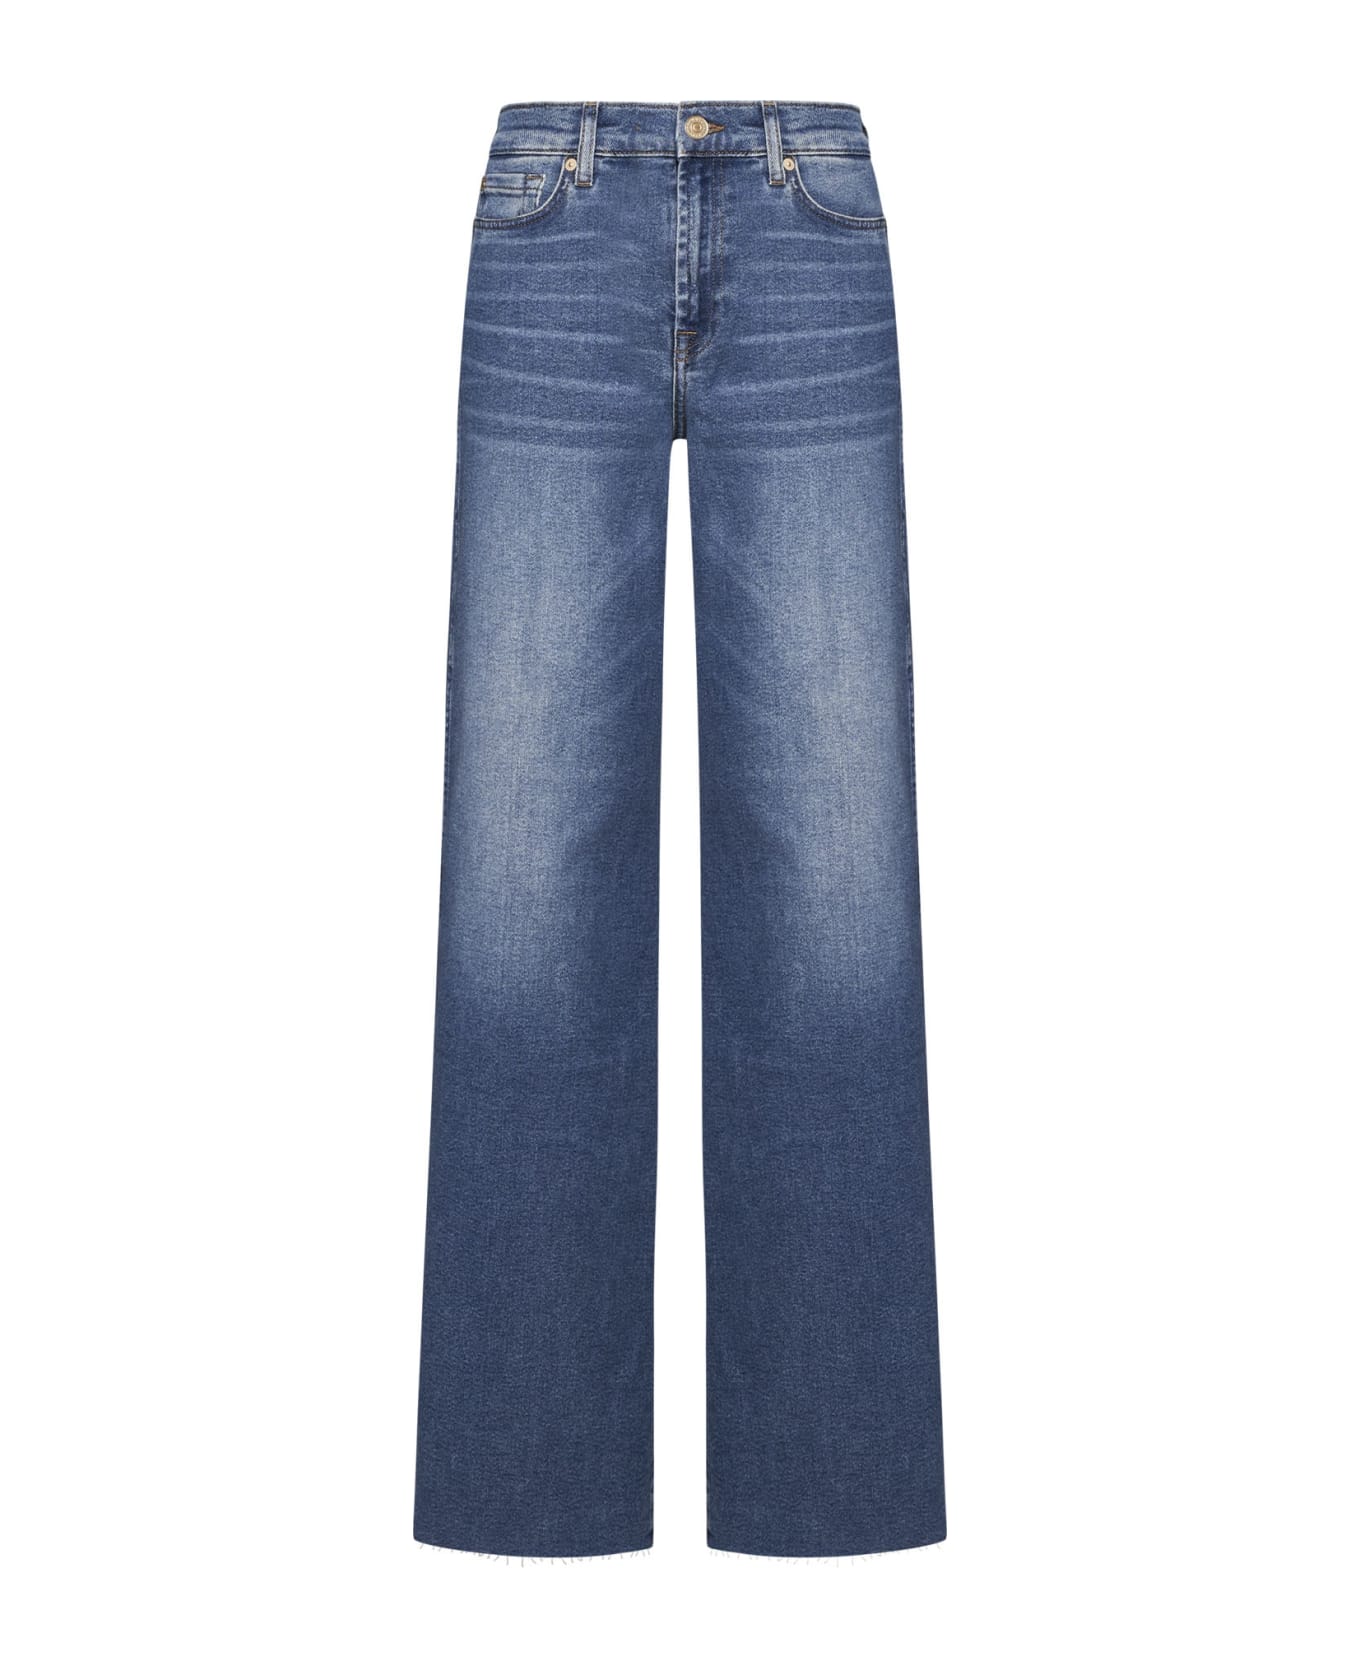 7 For All Mankind Jeans - Mid blue デニム